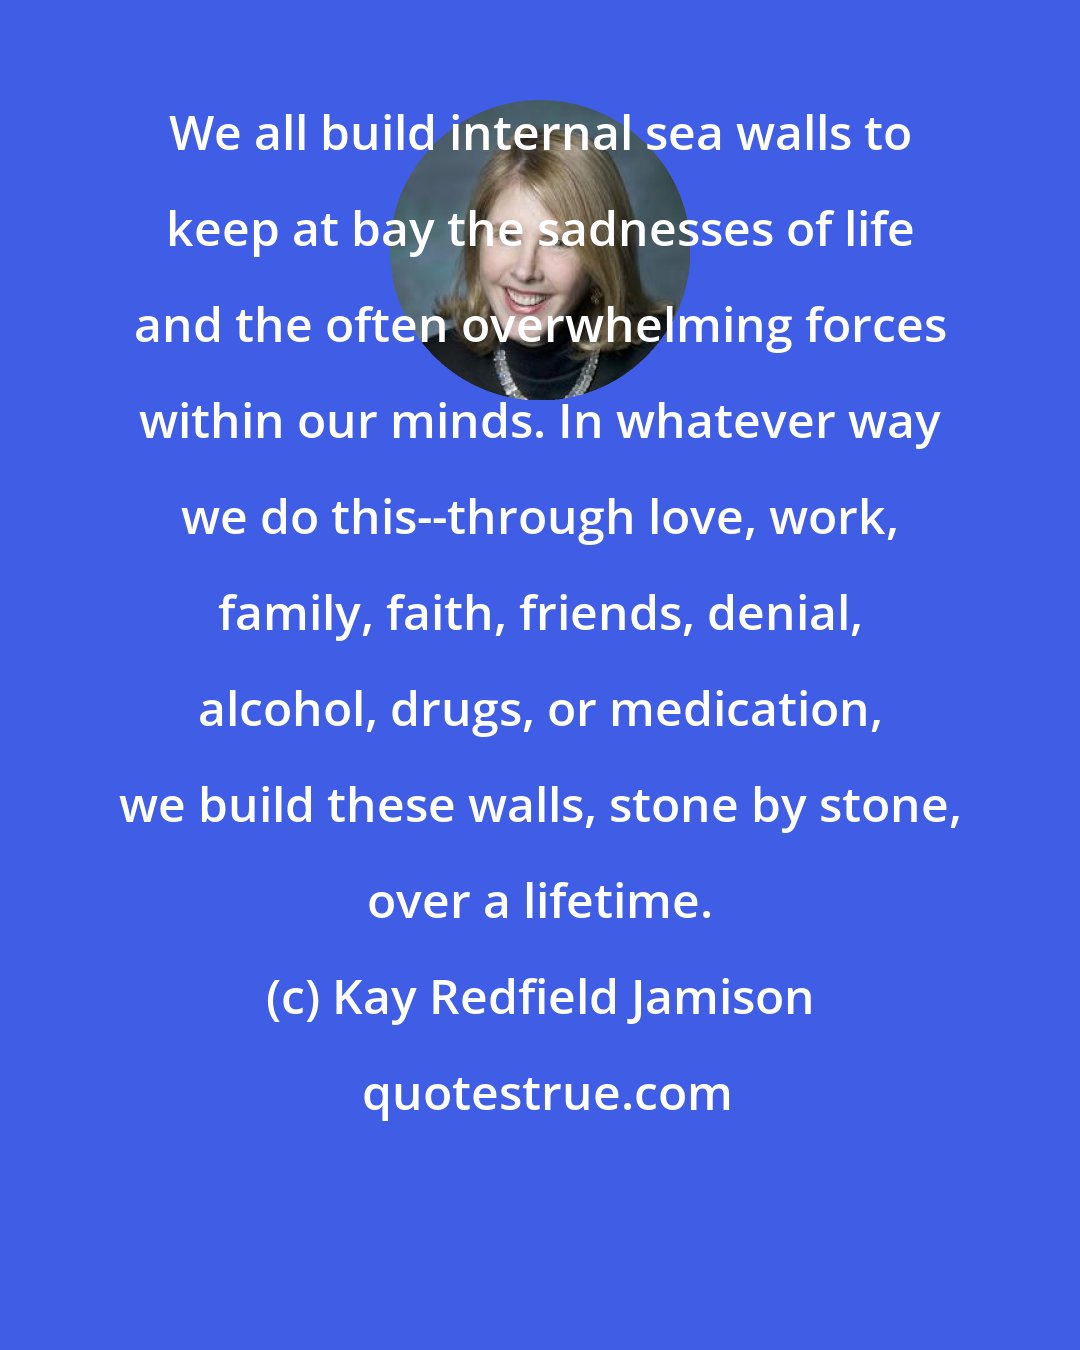 Kay Redfield Jamison: We all build internal sea walls to keep at bay the sadnesses of life and the often overwhelming forces within our minds. In whatever way we do this--through love, work, family, faith, friends, denial, alcohol, drugs, or medication, we build these walls, stone by stone, over a lifetime.